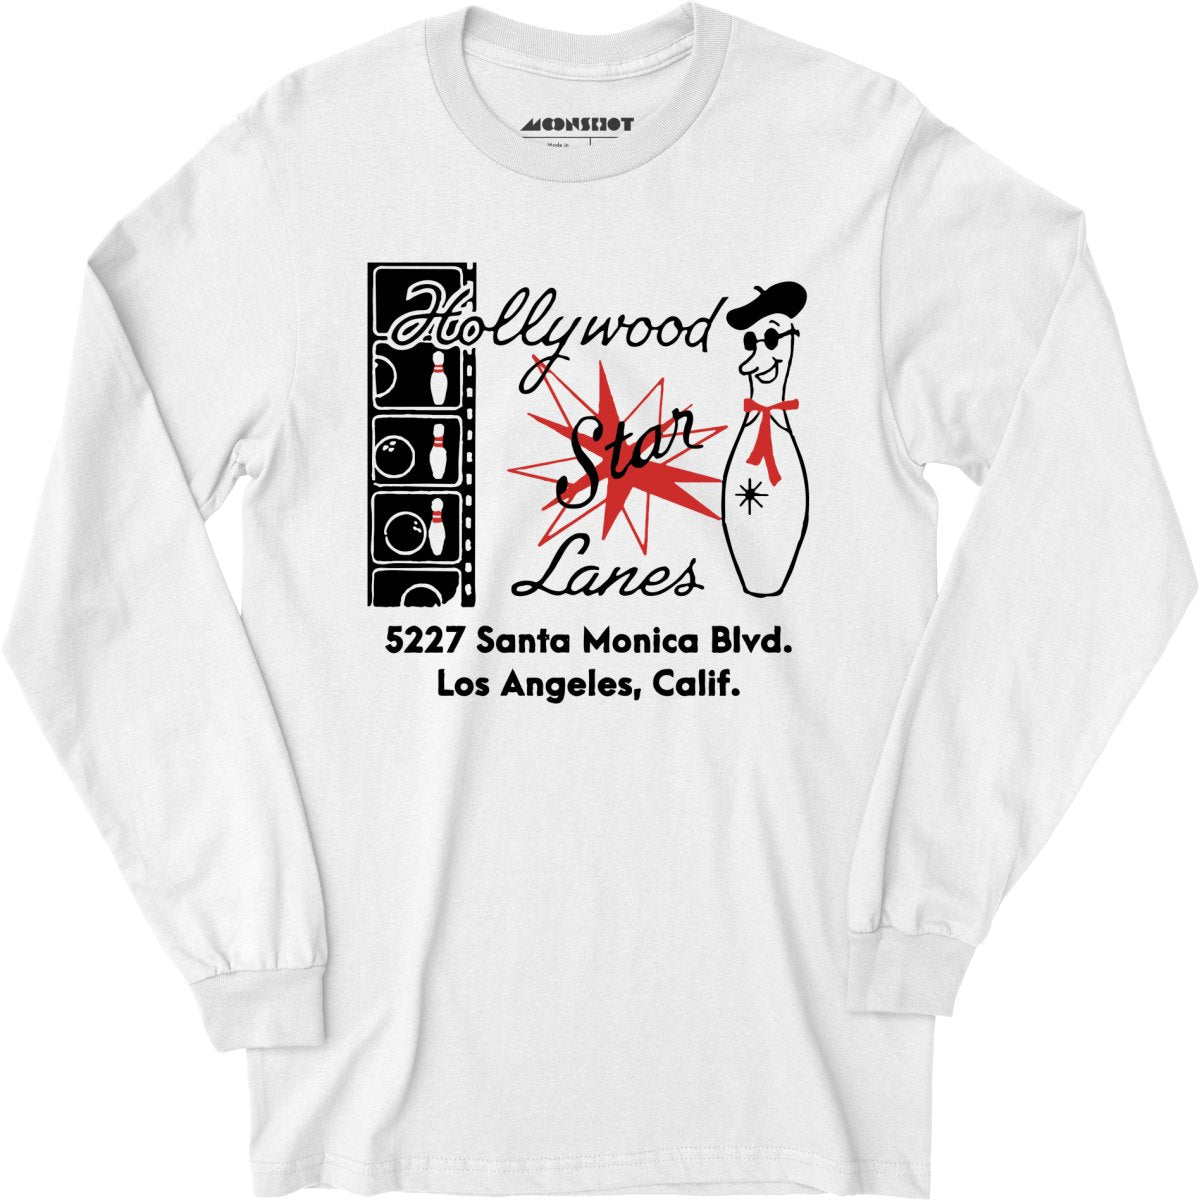 Hollywood Star Lanes - Los Angeles, CA - Vintage Bowling Alley - Long Sleeve T-Shirt